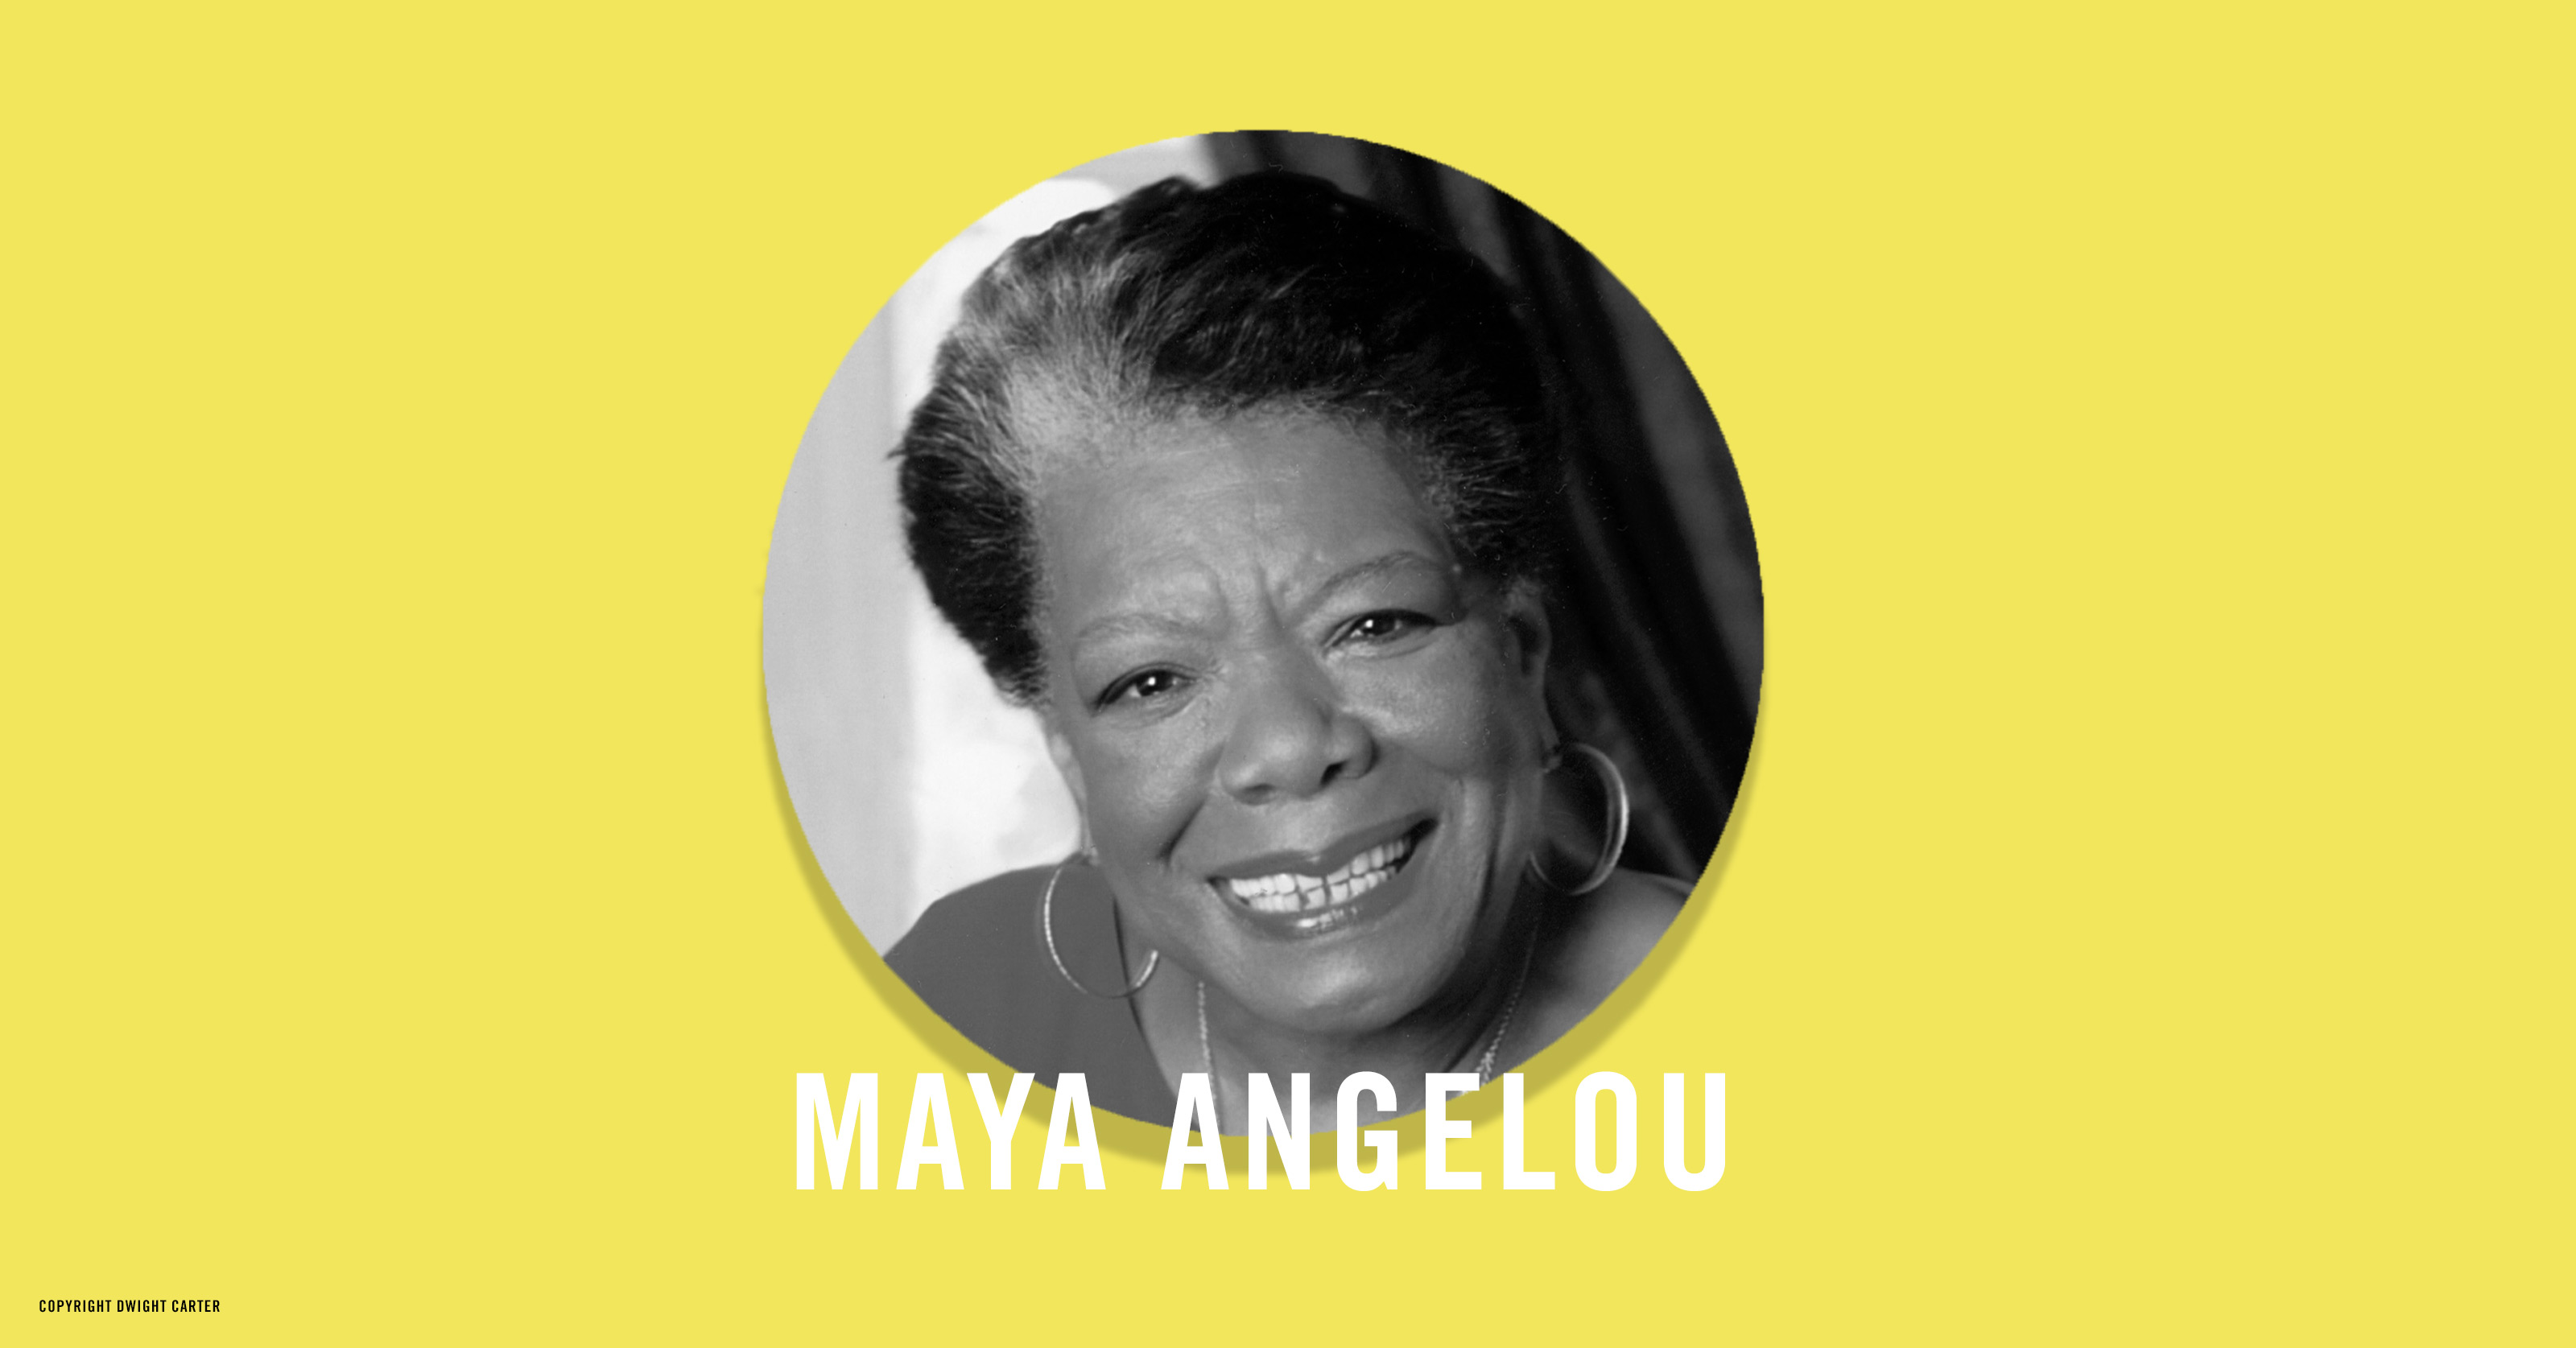 Be inspired by Maya Angelou | Hachette UK